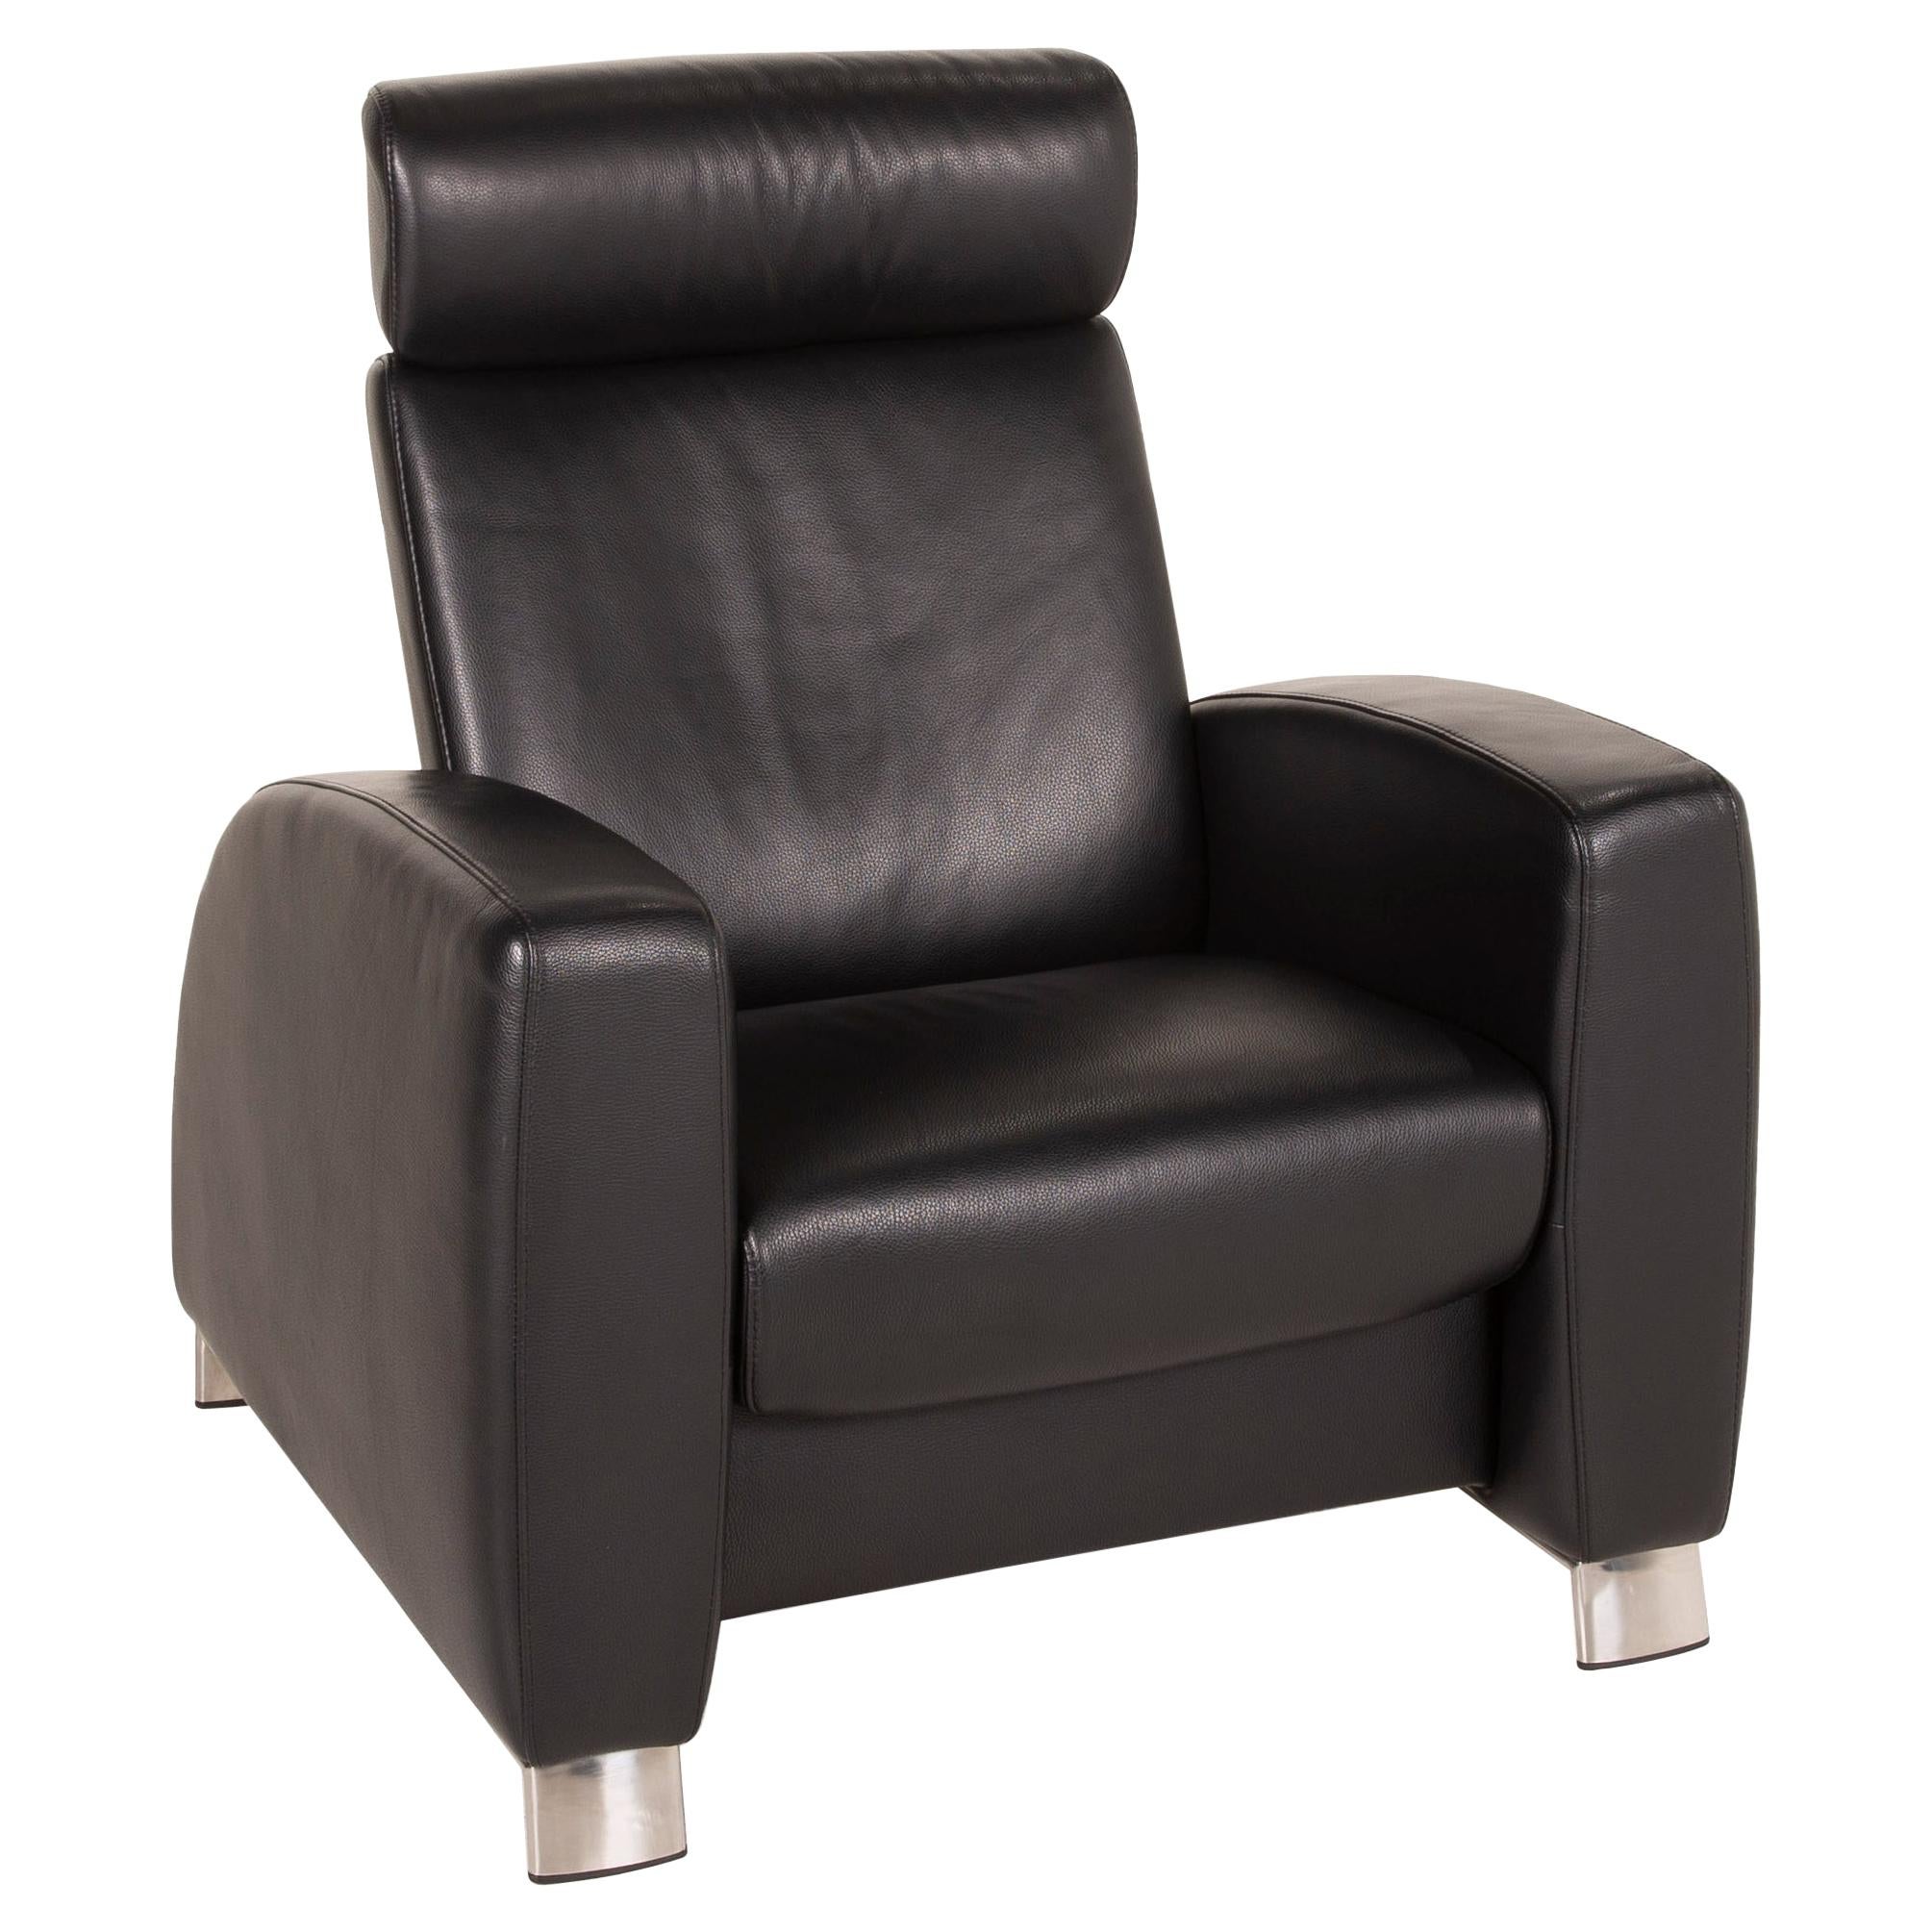 Stressless Arion Leather Armchair Black Relax Function For Sale